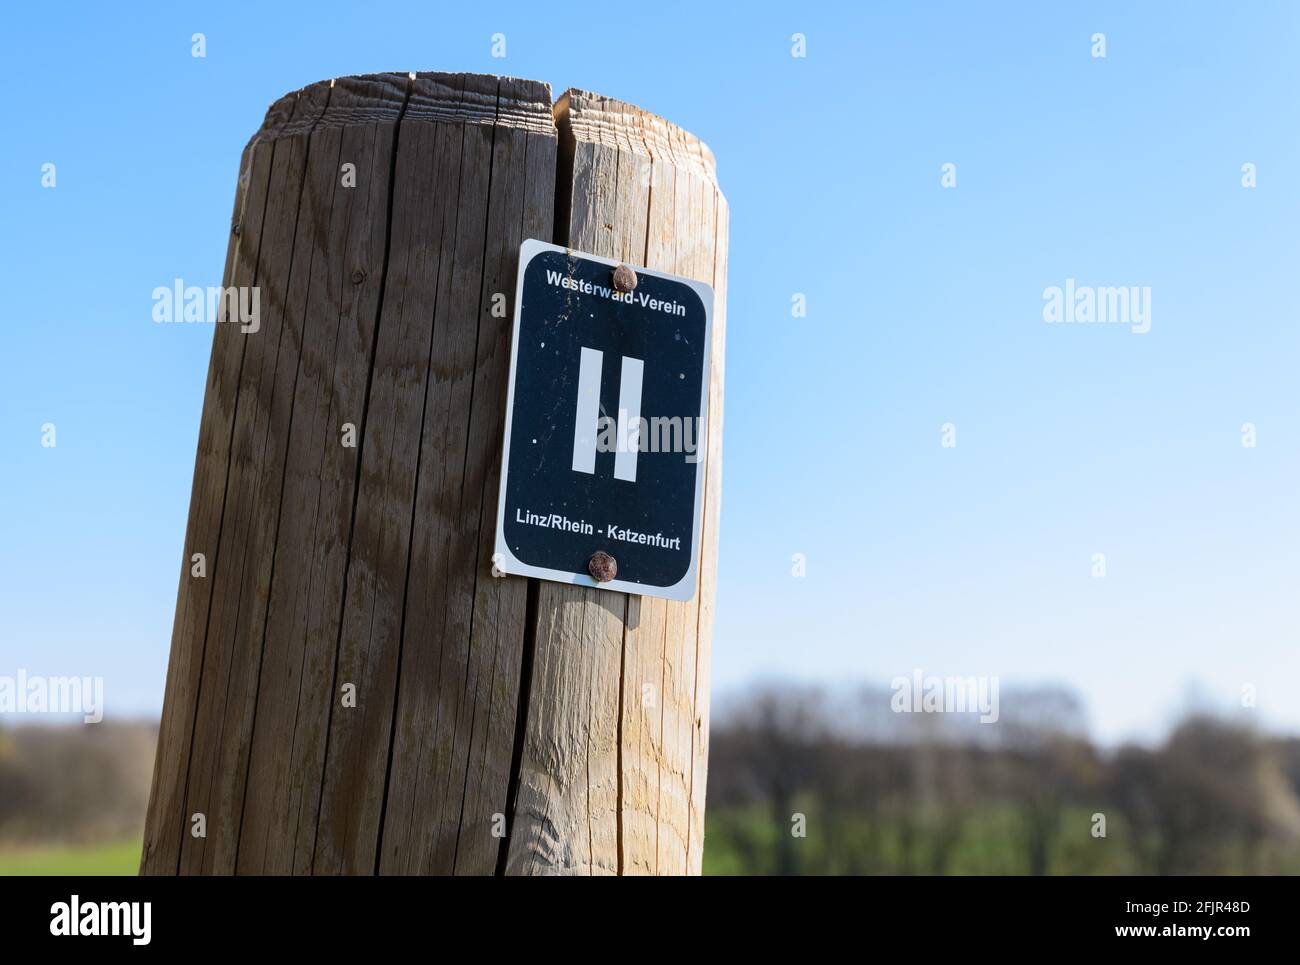 Wooden pole with waypoint or direction sign, Westerwald-Verein, Linz Rhein, Katzenfurt, along a hiking path against blue sky in Germany, Europe Stock Photo